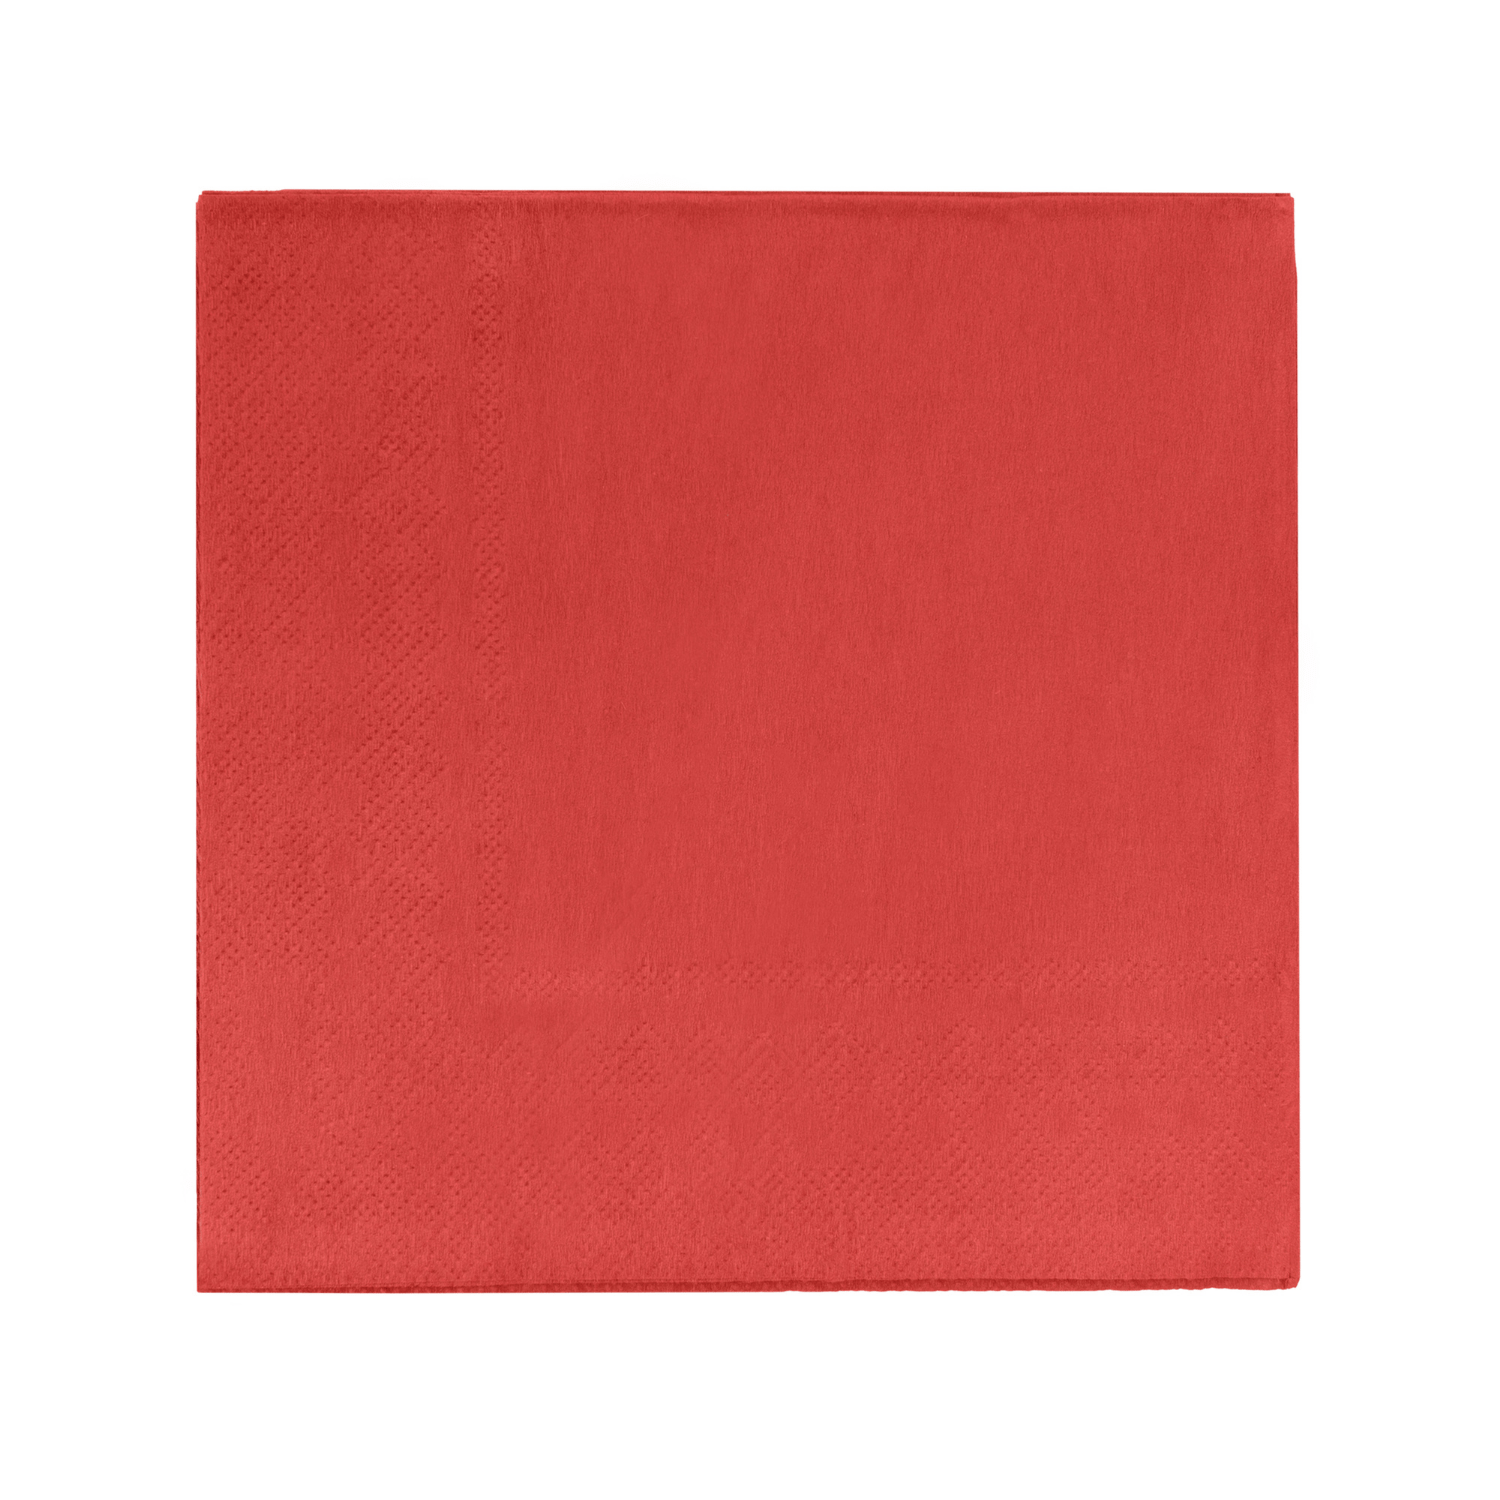 Red Luncheon Napkins | 3600 Pack